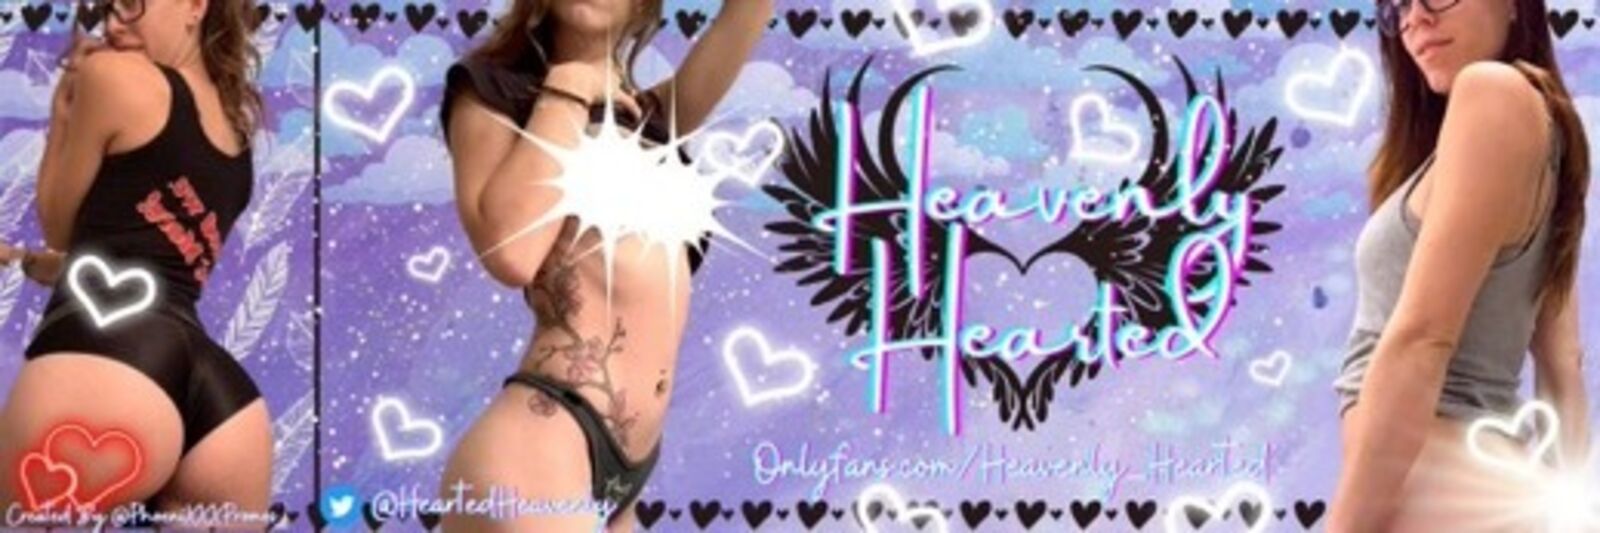 See Heavenly_Hearted - NO PPV profile